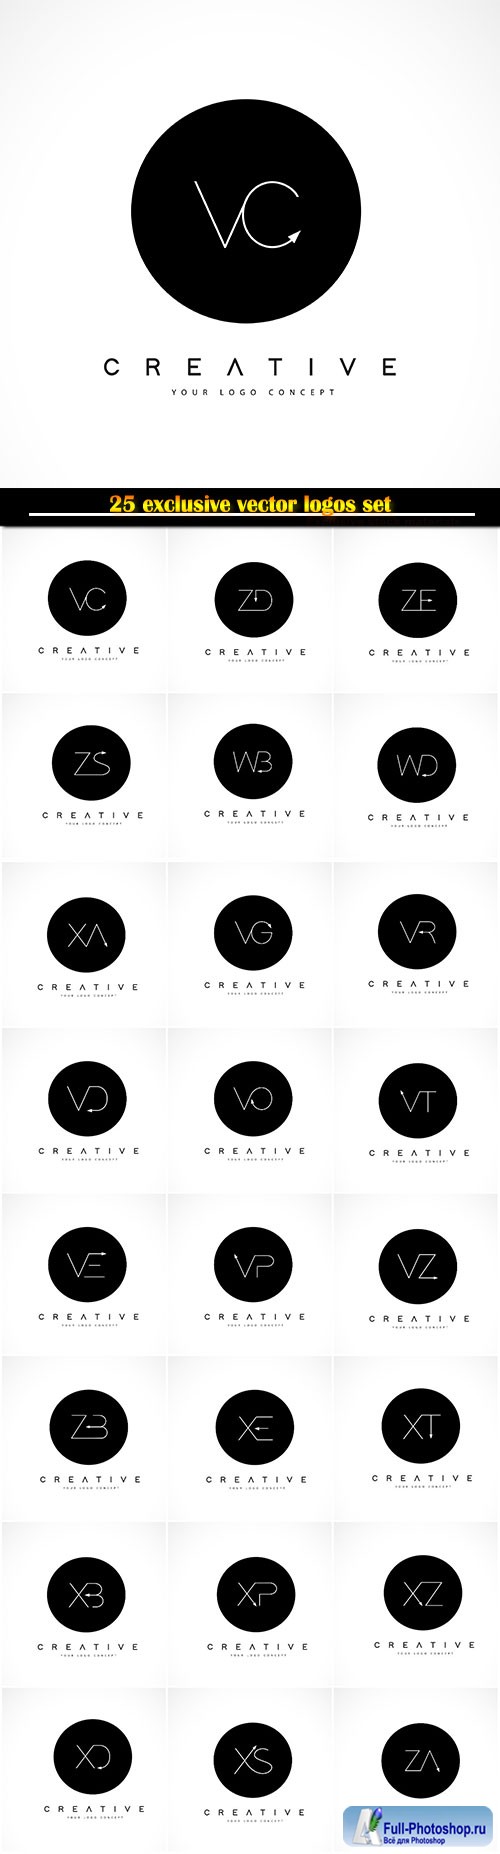 Logo vector design with black and white creative text letter